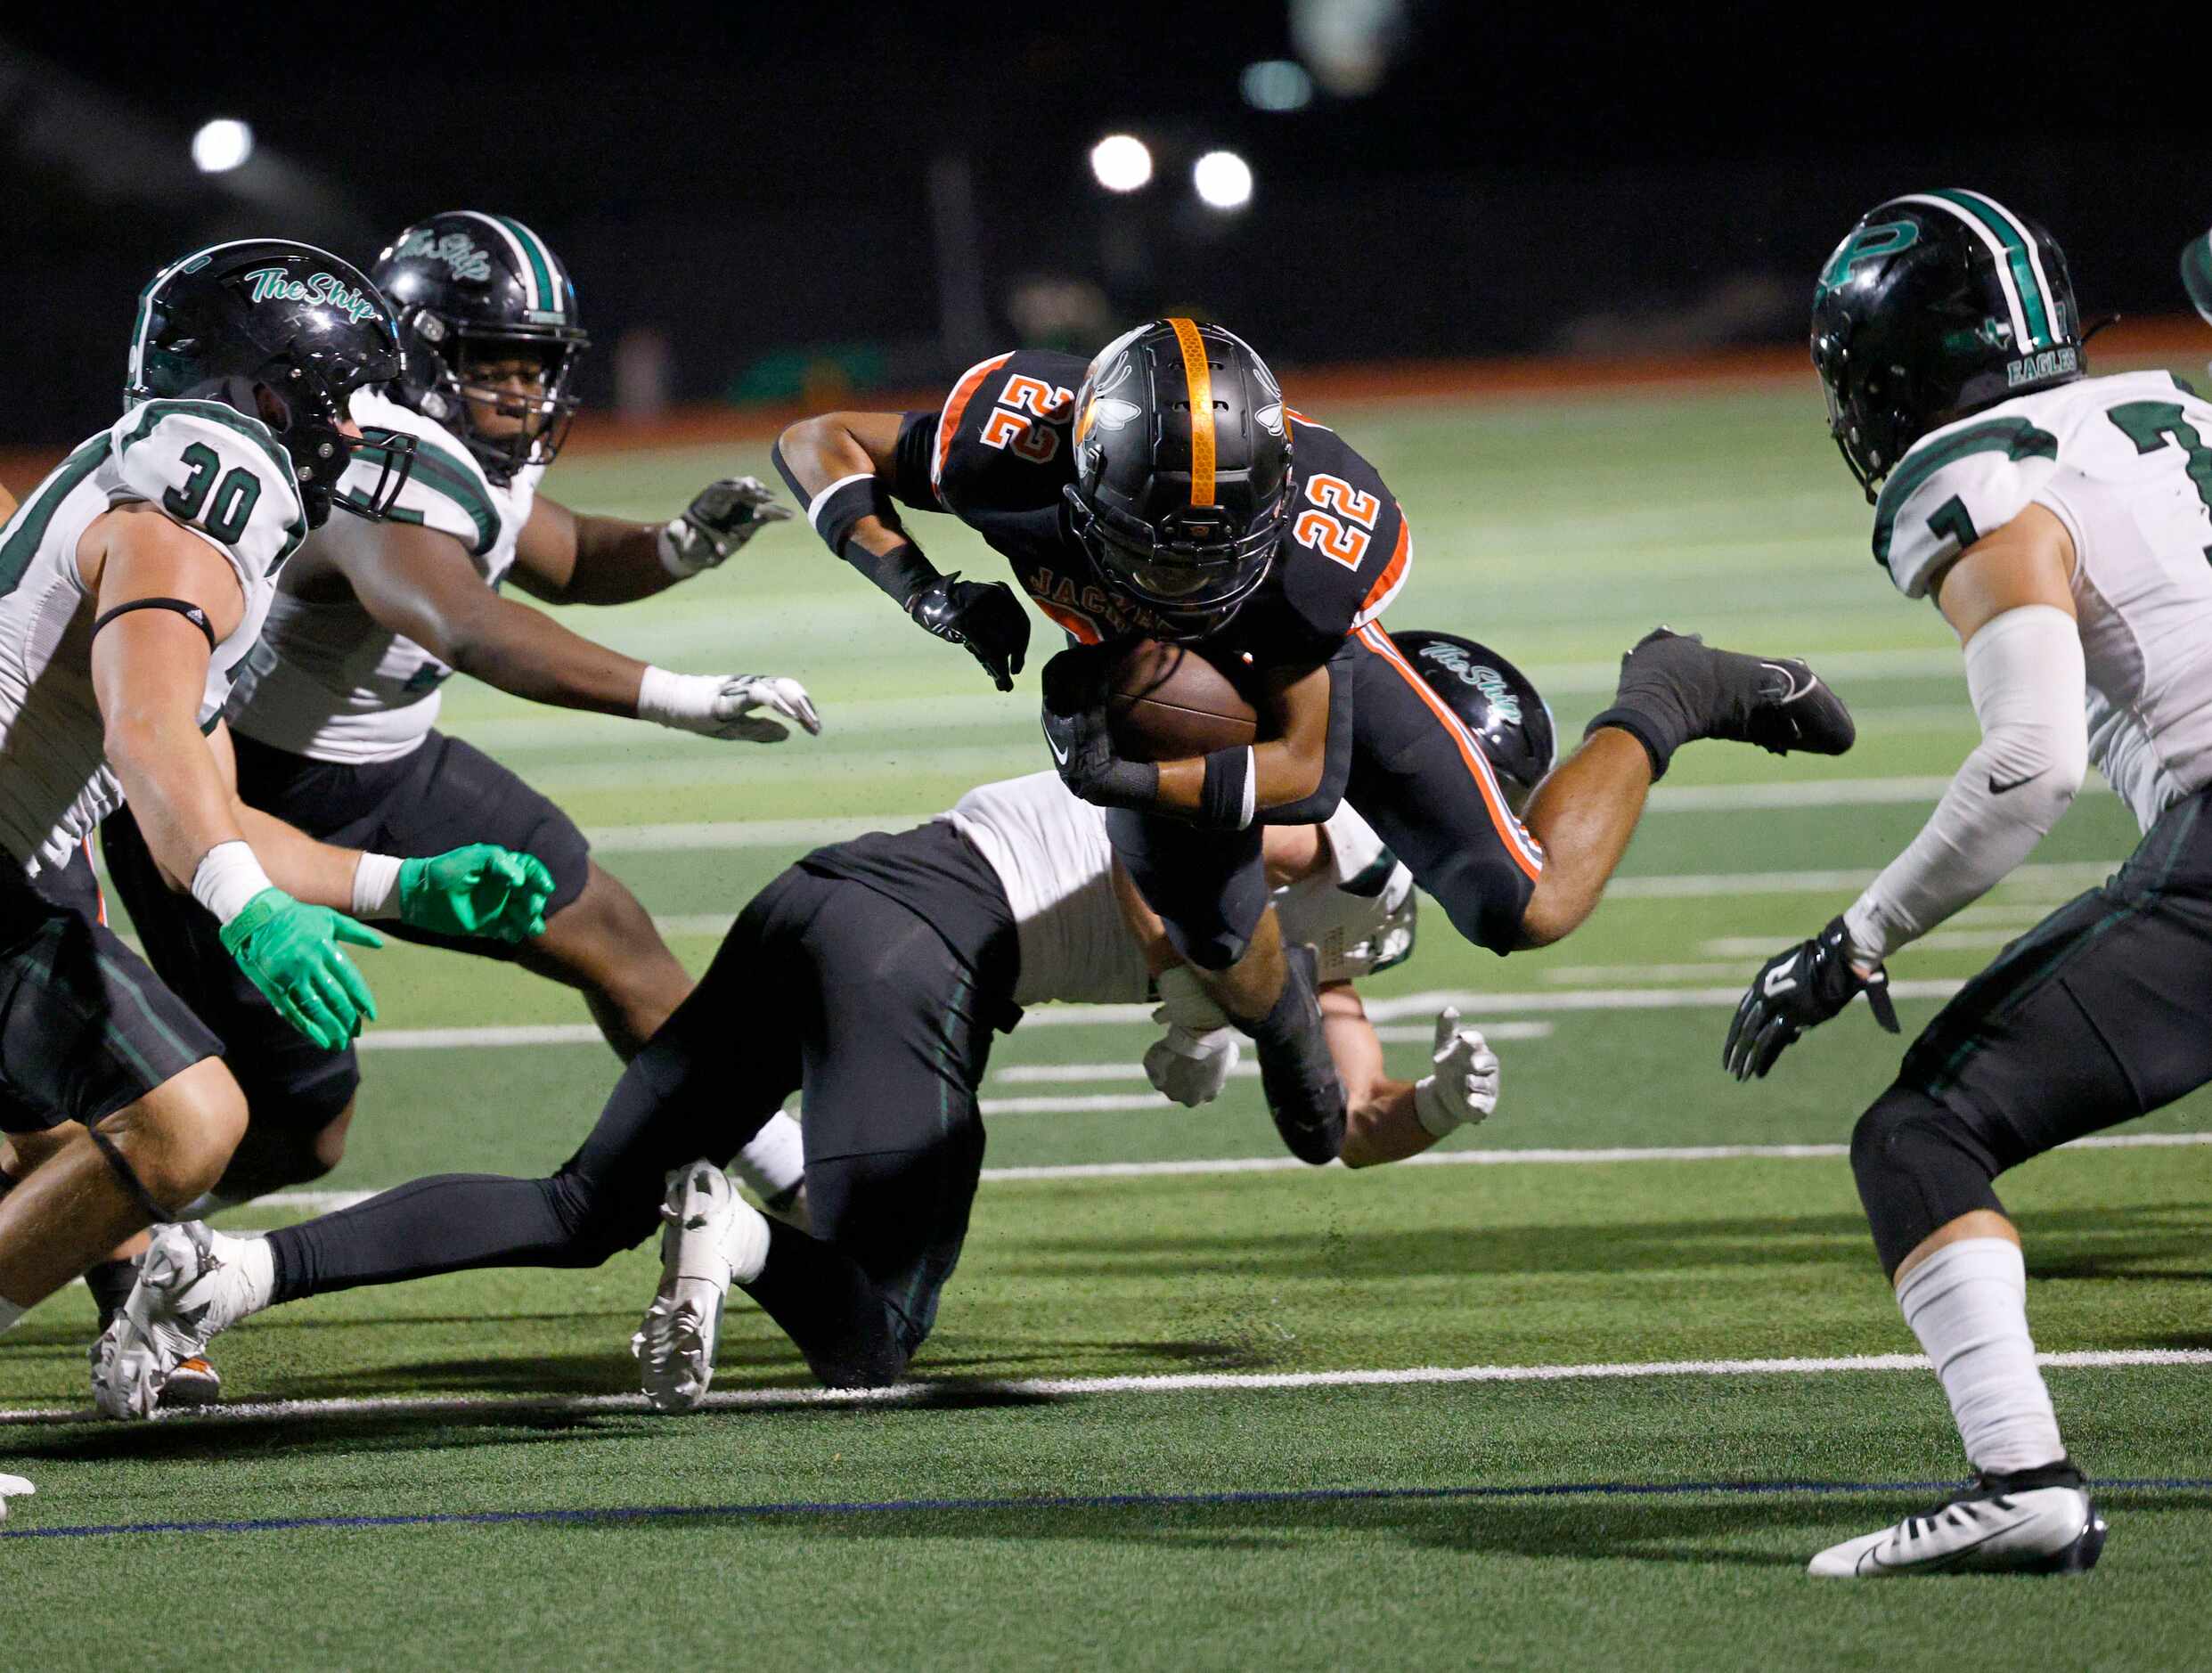 Prosper’s defense players go to stop Rockwall's Parker Williams (22) during the first half...